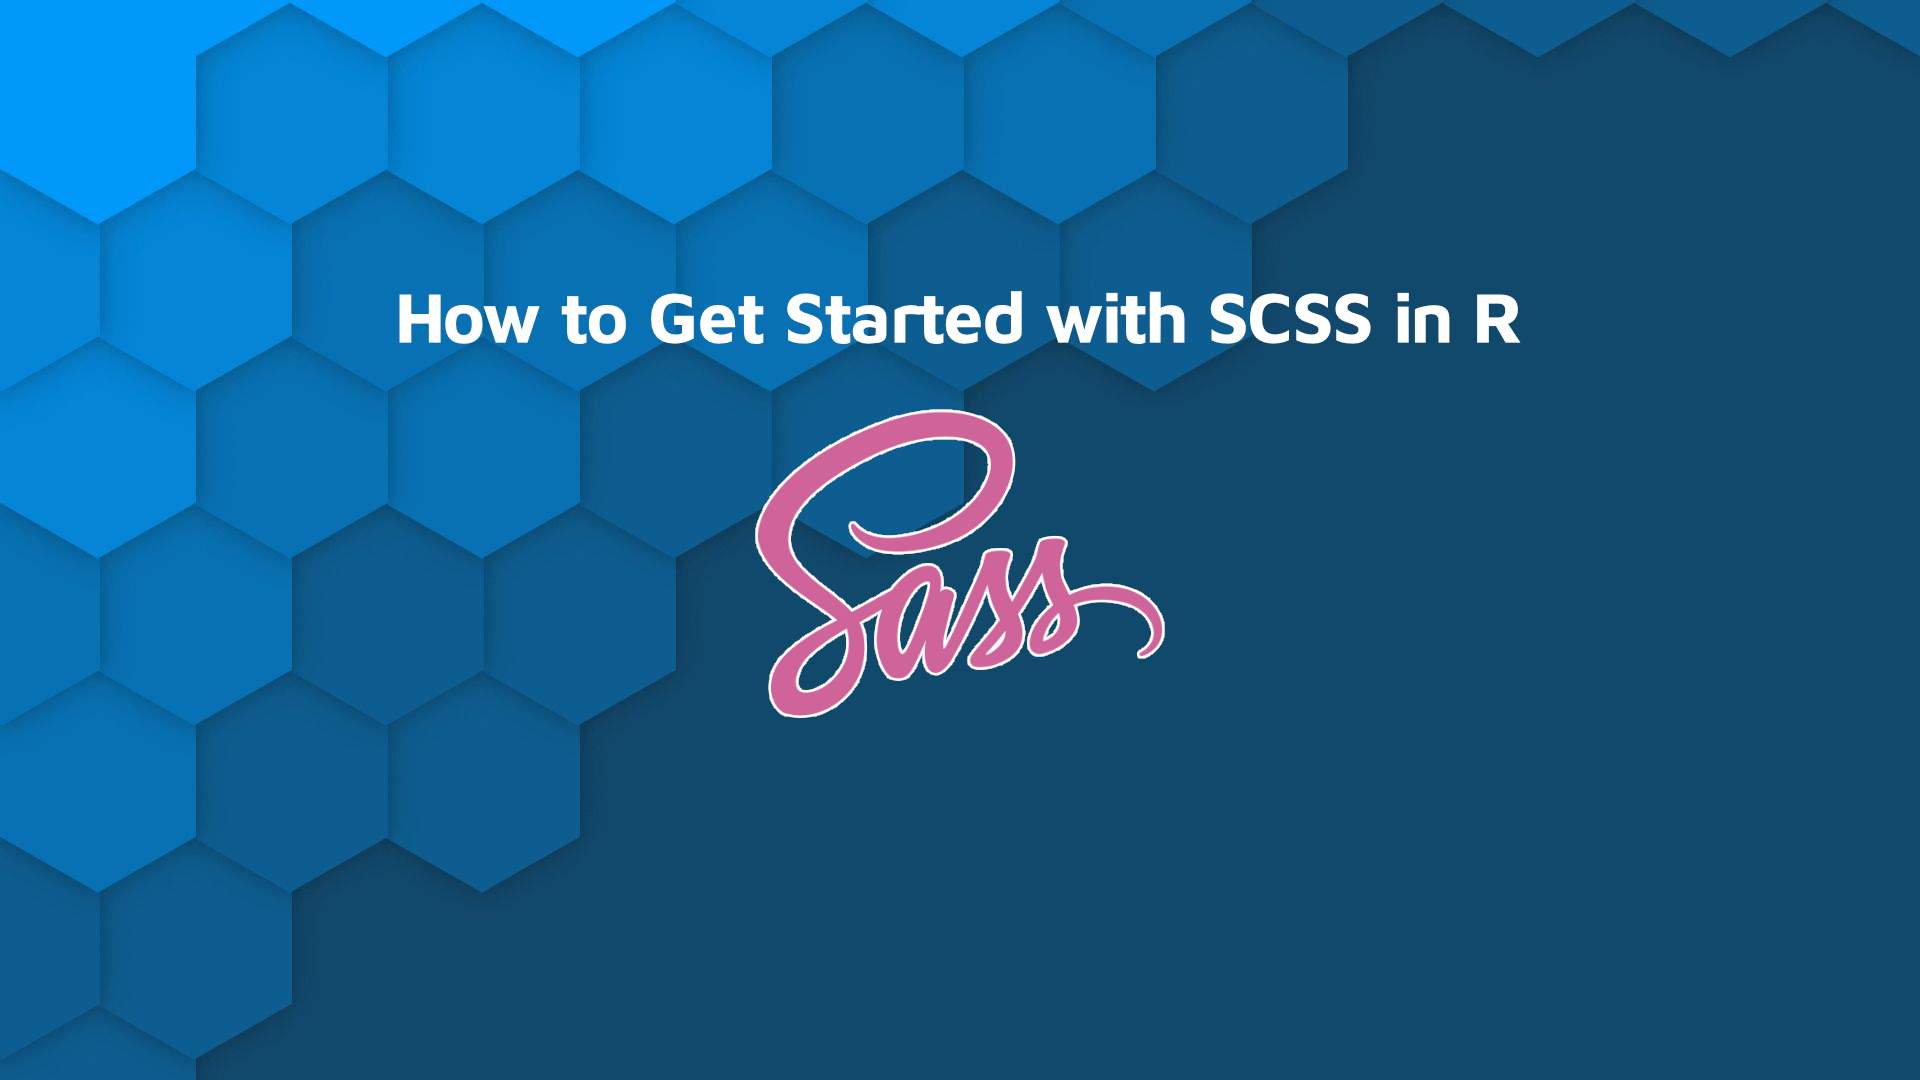 Get Started with SCSS Thumbnail